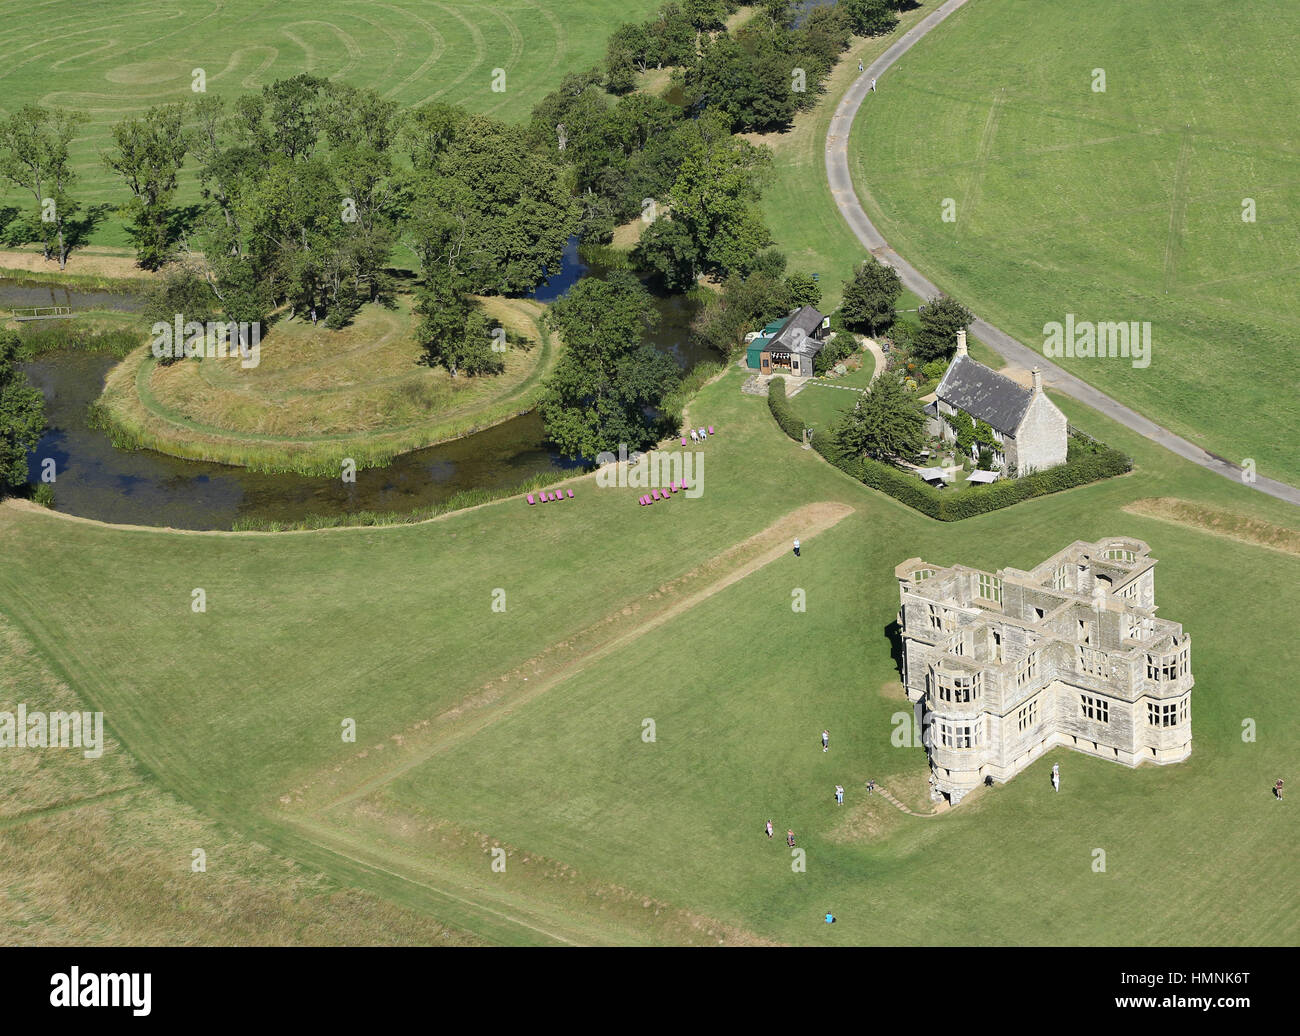 Spectacular aerial views of the National Trust property of Lyveden New Bield in Northamptonshire, U.K. Stock Photo